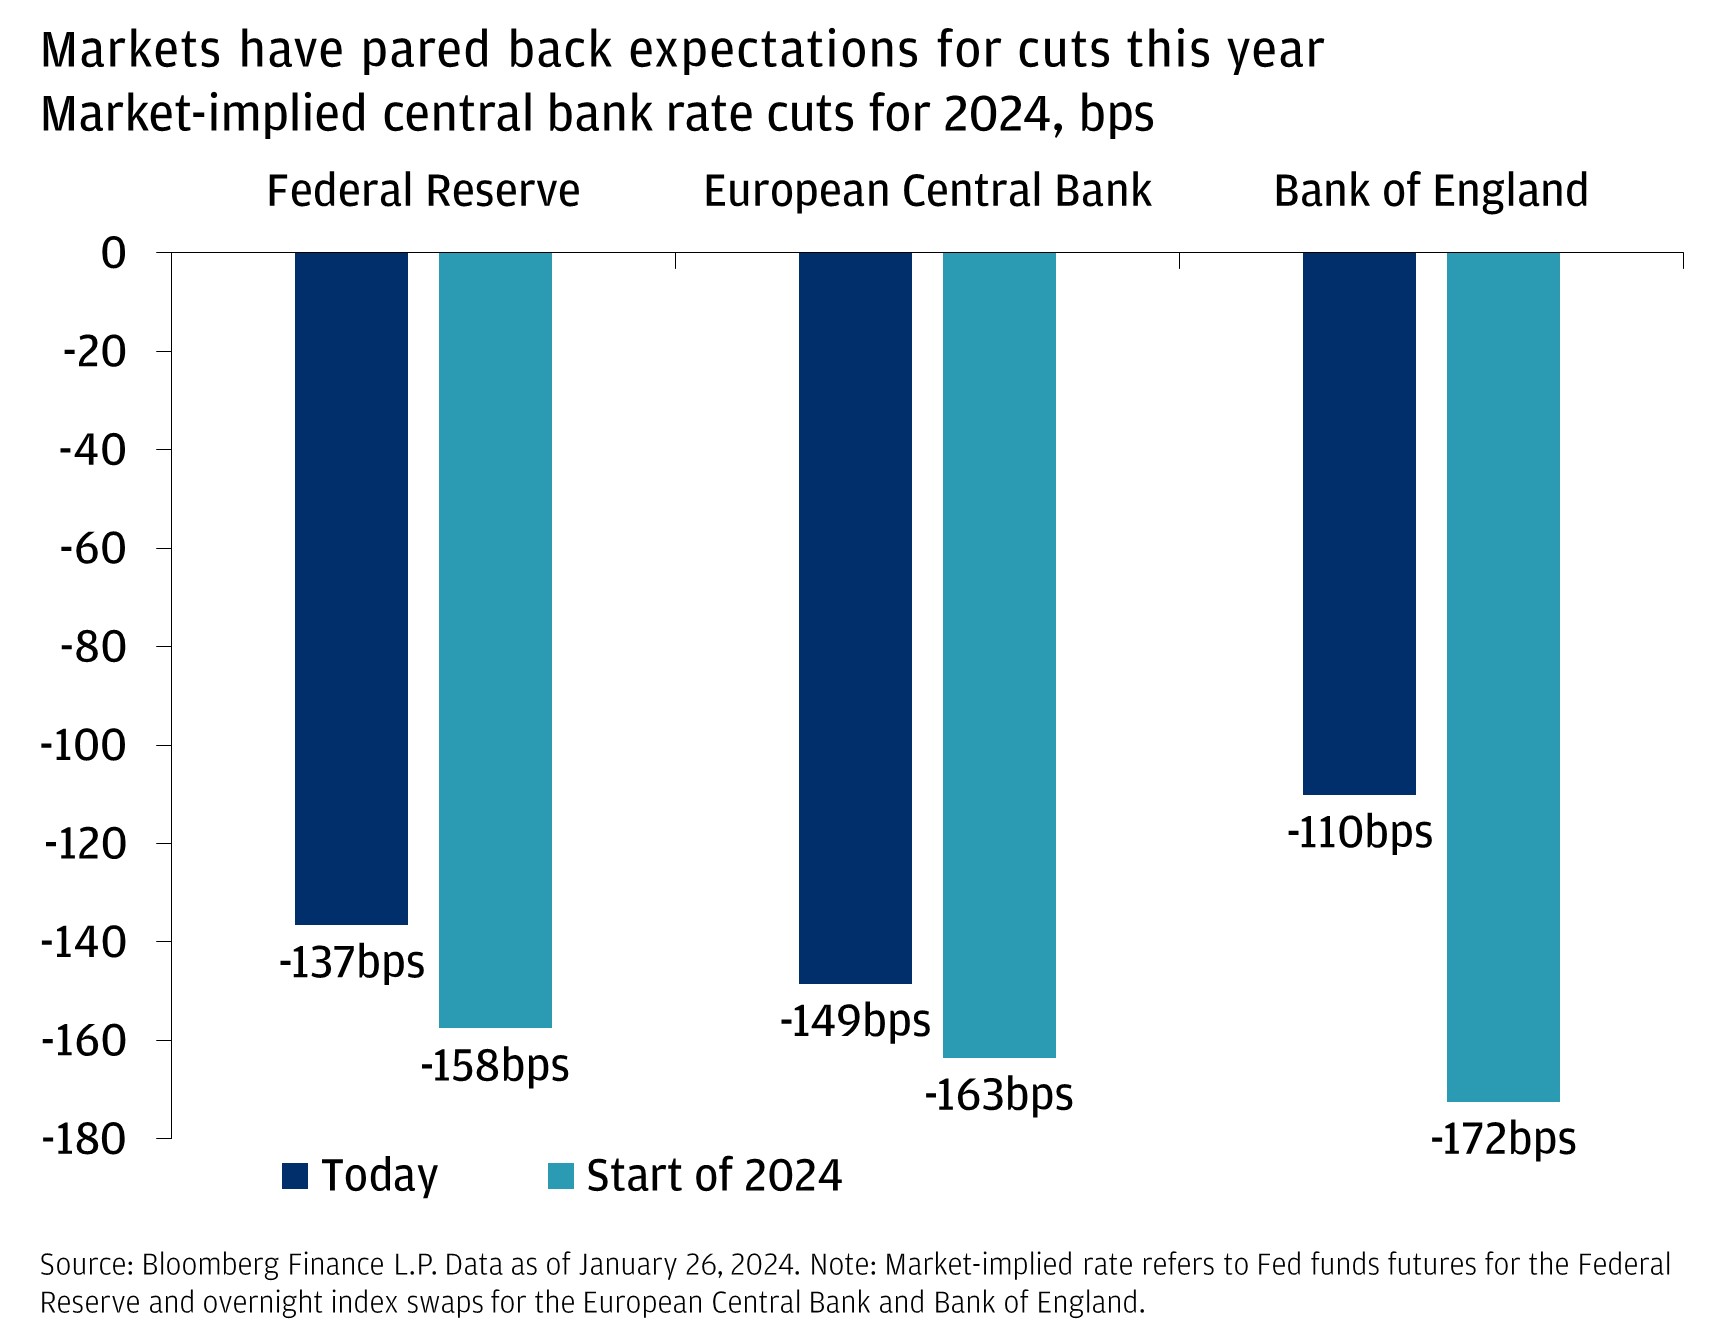 The chart shows the market implied policy rate cuts in 2024 for the Federal Reserve, European Central Bank and Bank of England at the start of 2024 and today. For the Federal Reserve, market pricing at the start of this year implied 158bps cuts vs. 137bps today. For the Federal Reserve, market pricing at the start of this year implied 163bps cuts vs. 149bps today. For the Bank of England, market pricing at the start of this year implied 172bps cuts vs. 110bps today.